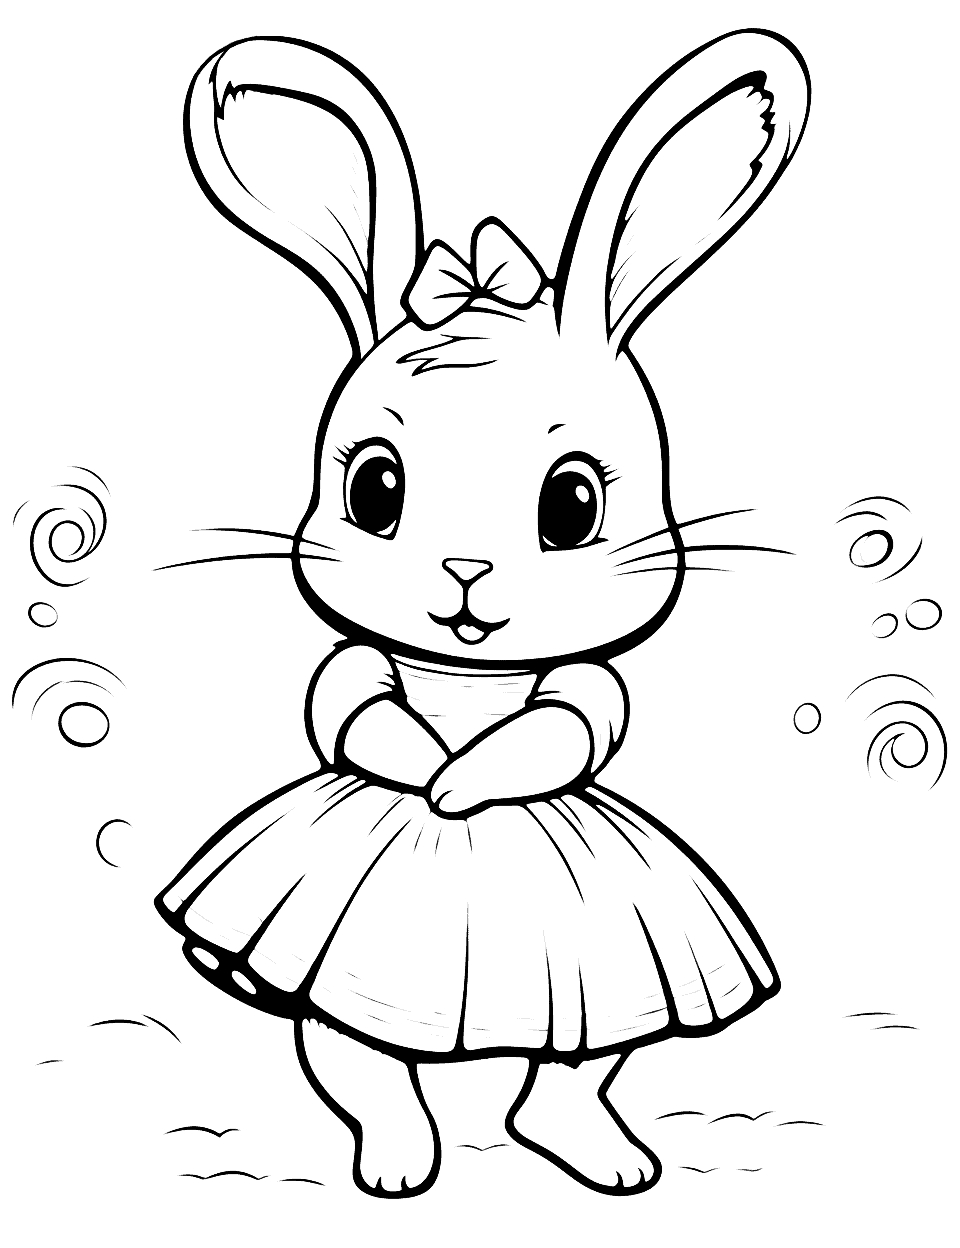 Dancing Ballerina Bunny Coloring Page - A cute bunny dressed as a ballerina, dancing gracefully.